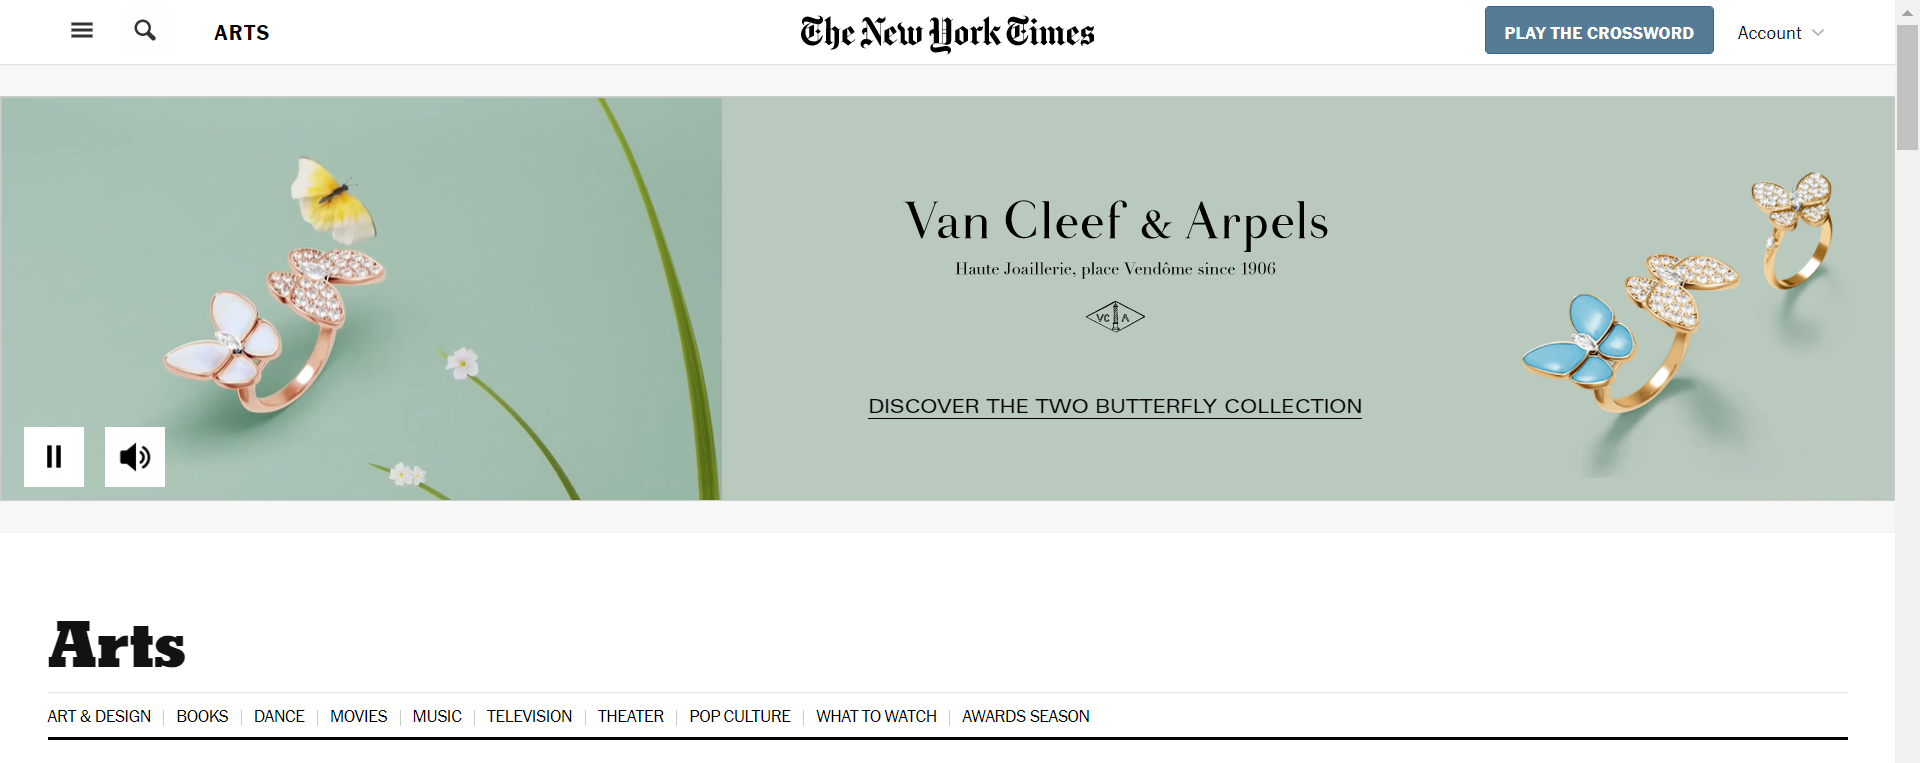 An example of a rich media ad from Van Cleef & Arpels found on The New York Times website.